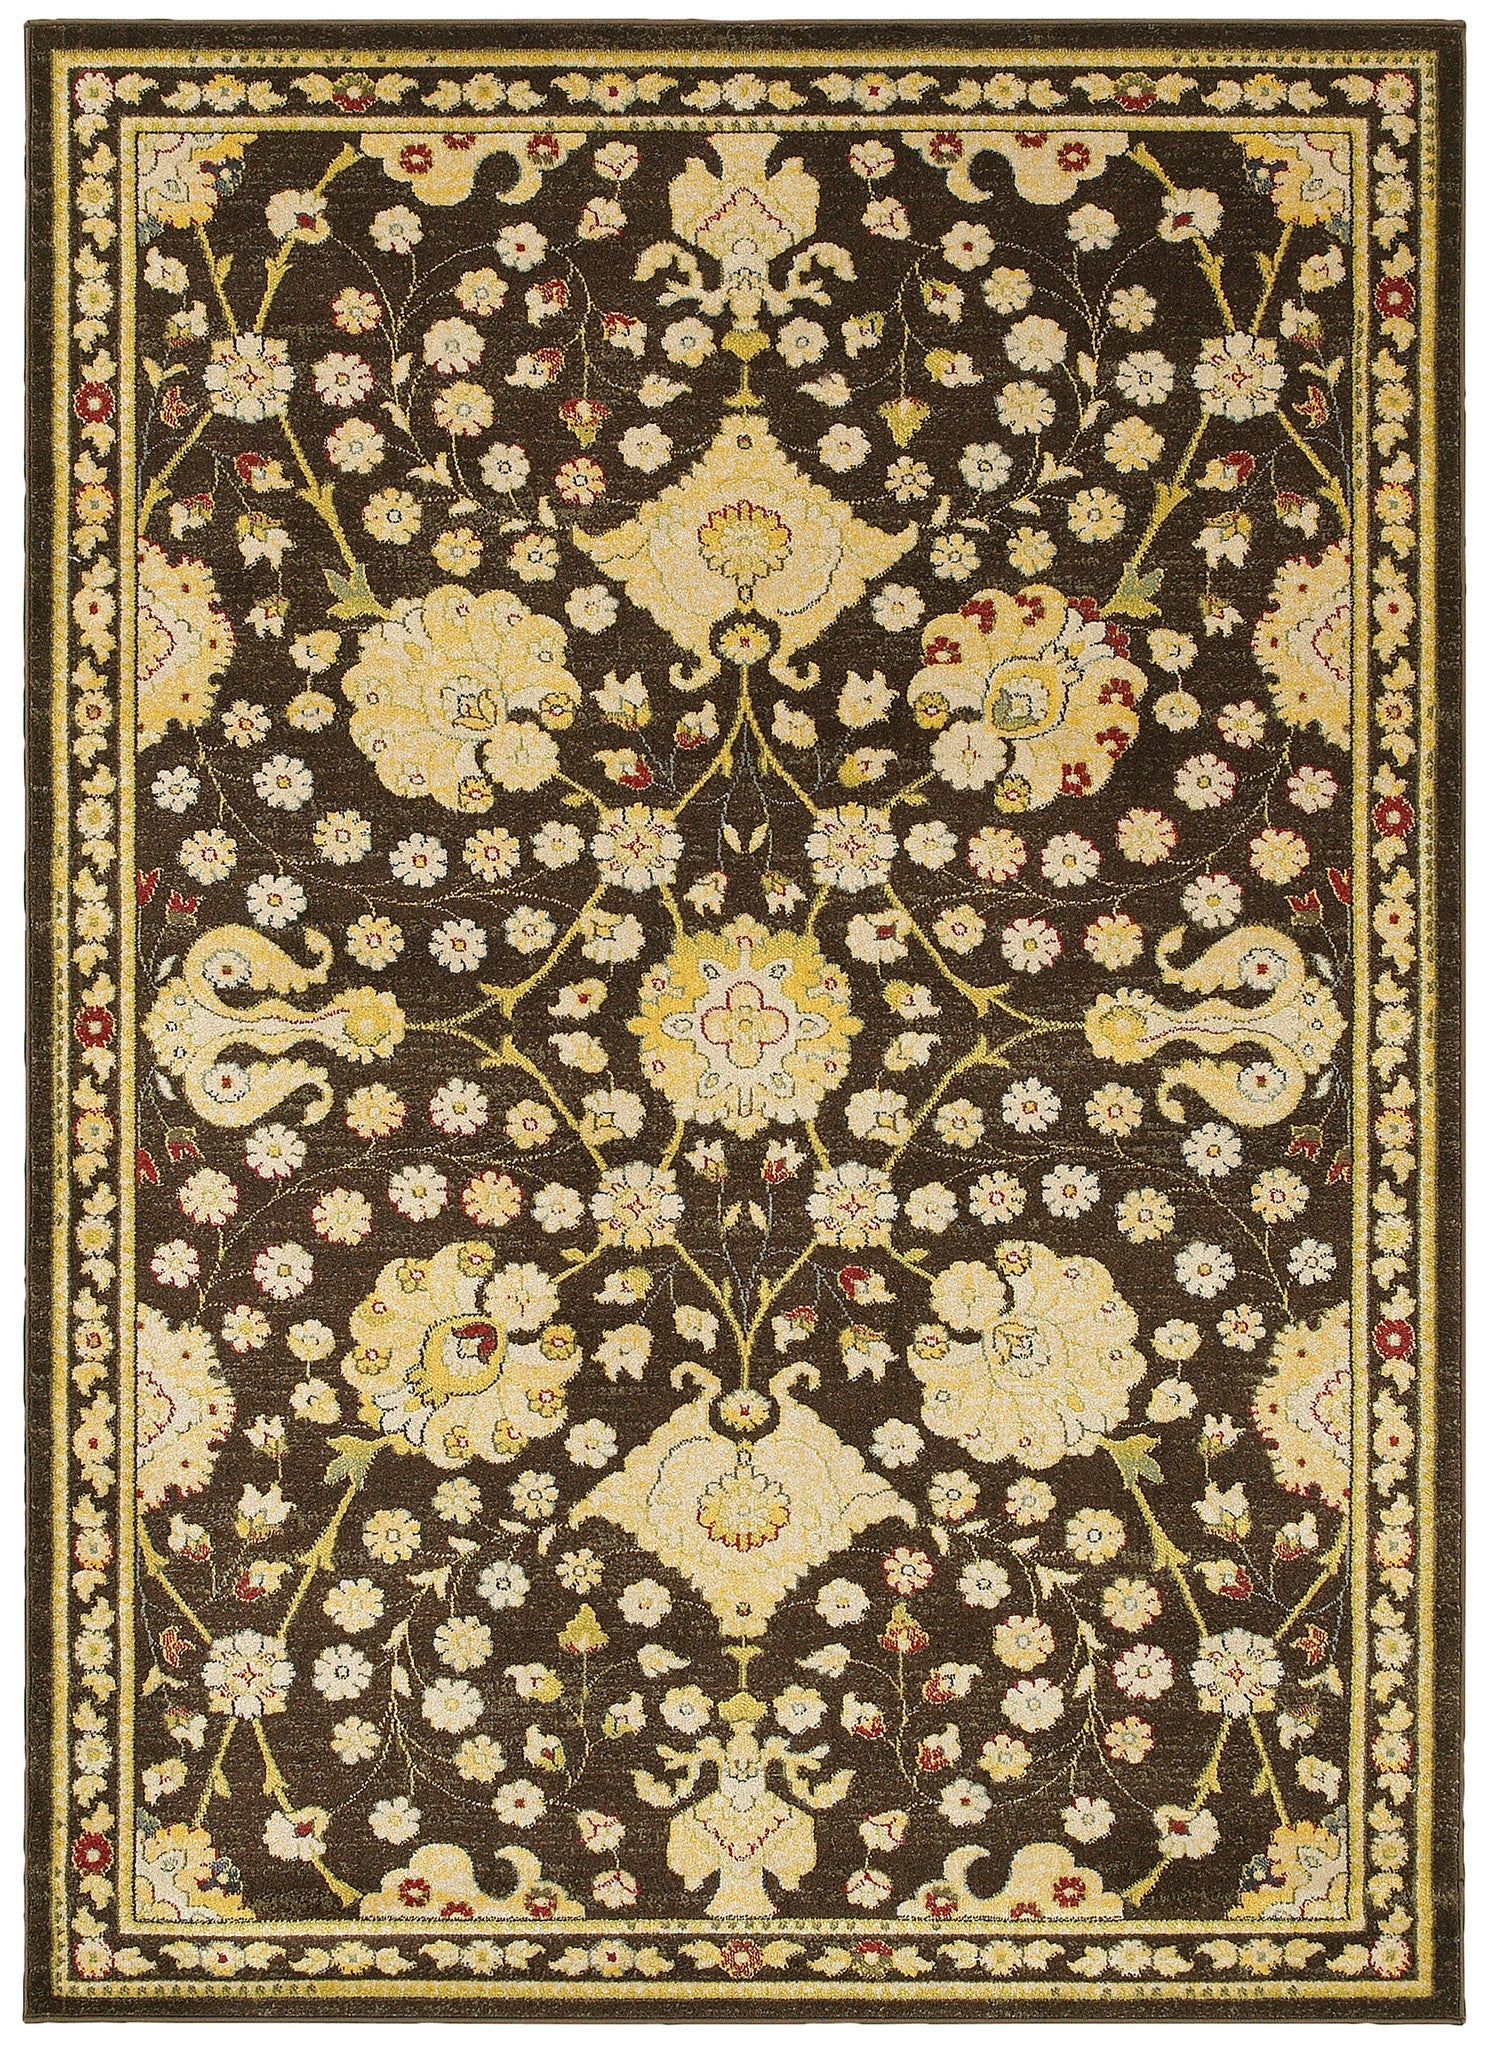 LR Resources Antigua 80990 Brown/Green Area Rug